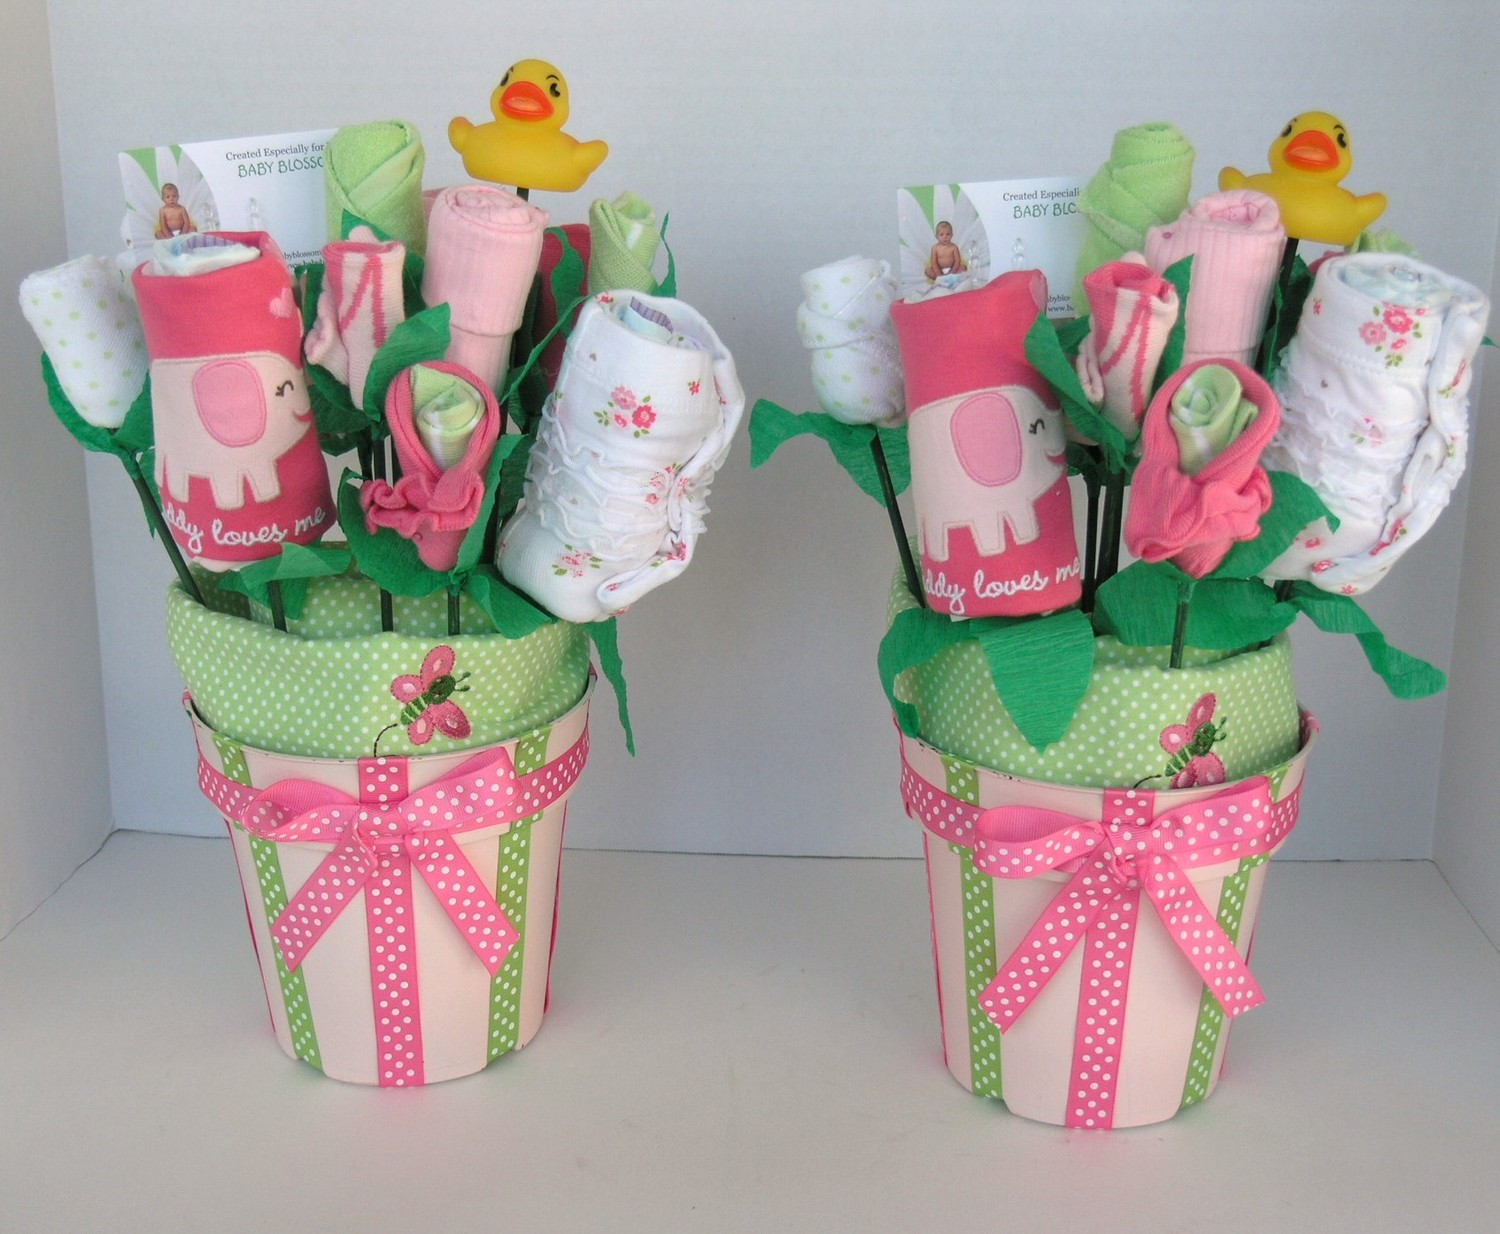 Gift Ideas For New Baby Girl
 Five Best DIY Baby Gifting Ideas for The Little Special